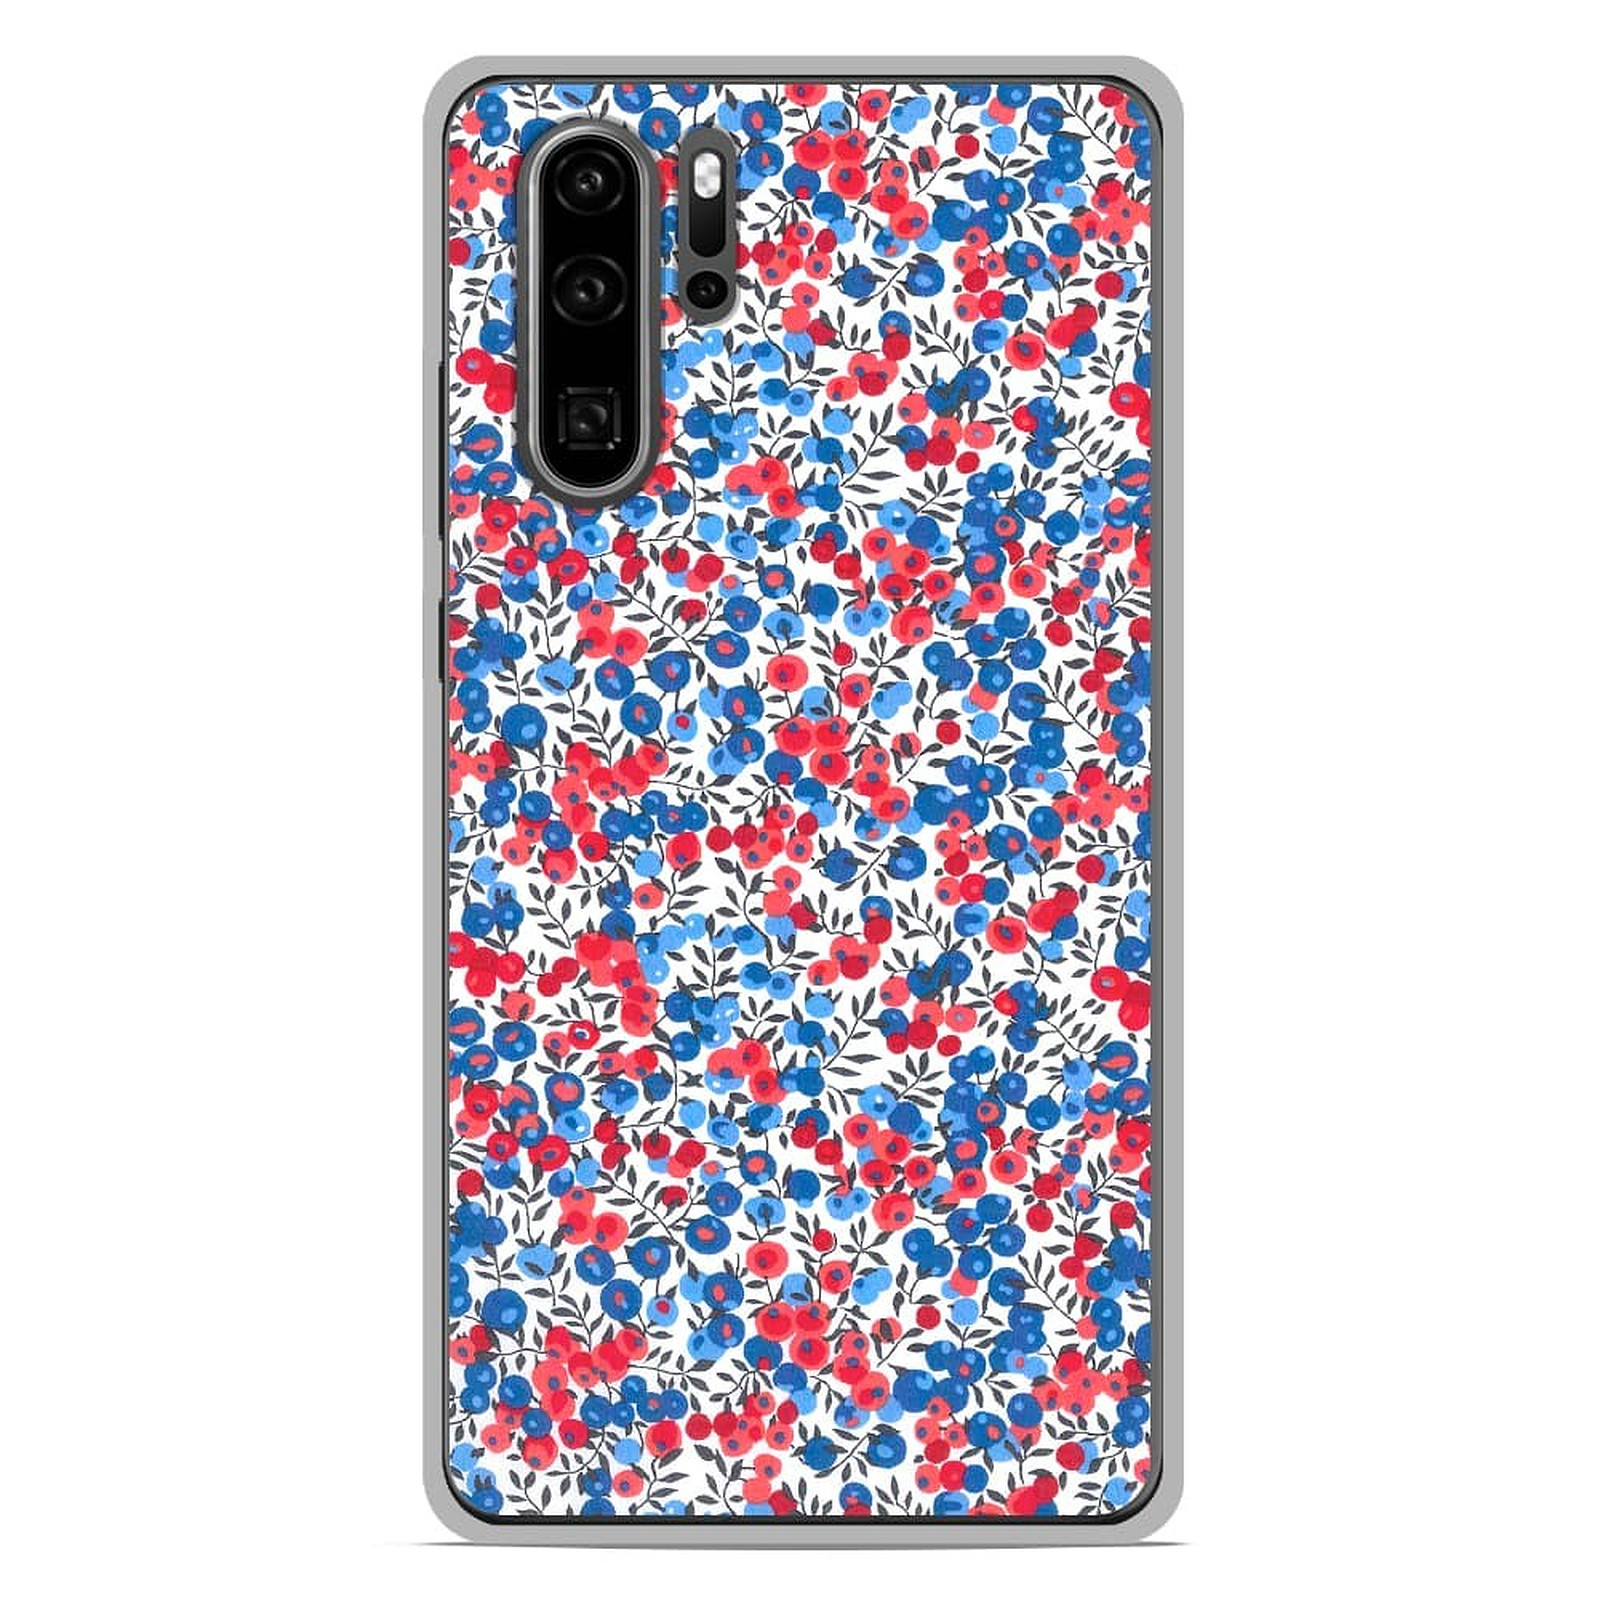 1001 Coques Coque silicone gel Huawei P30 Pro motif Liberty Wiltshire Bleu - Coque telephone 1001Coques